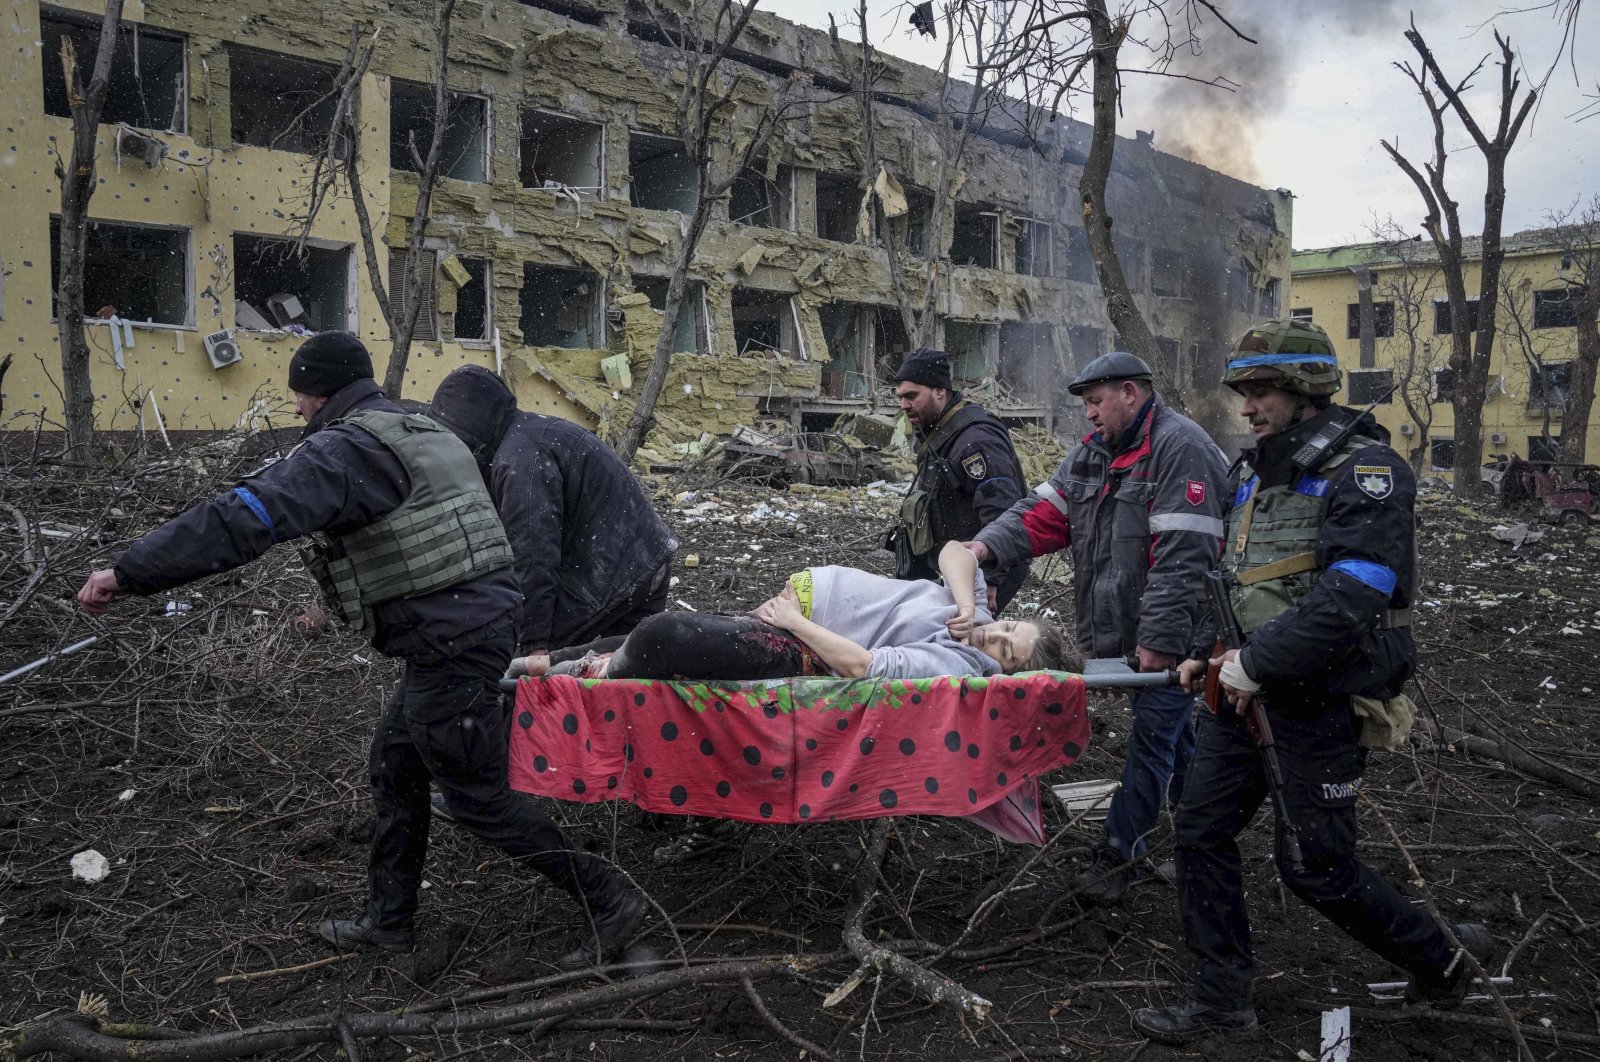 Ukrainian emergency employees and volunteers carry an injured pregnant woman from a maternity hospital that was damaged by shelling in Mariupol, Ukraine, March 9, 2022. (AP Photo)